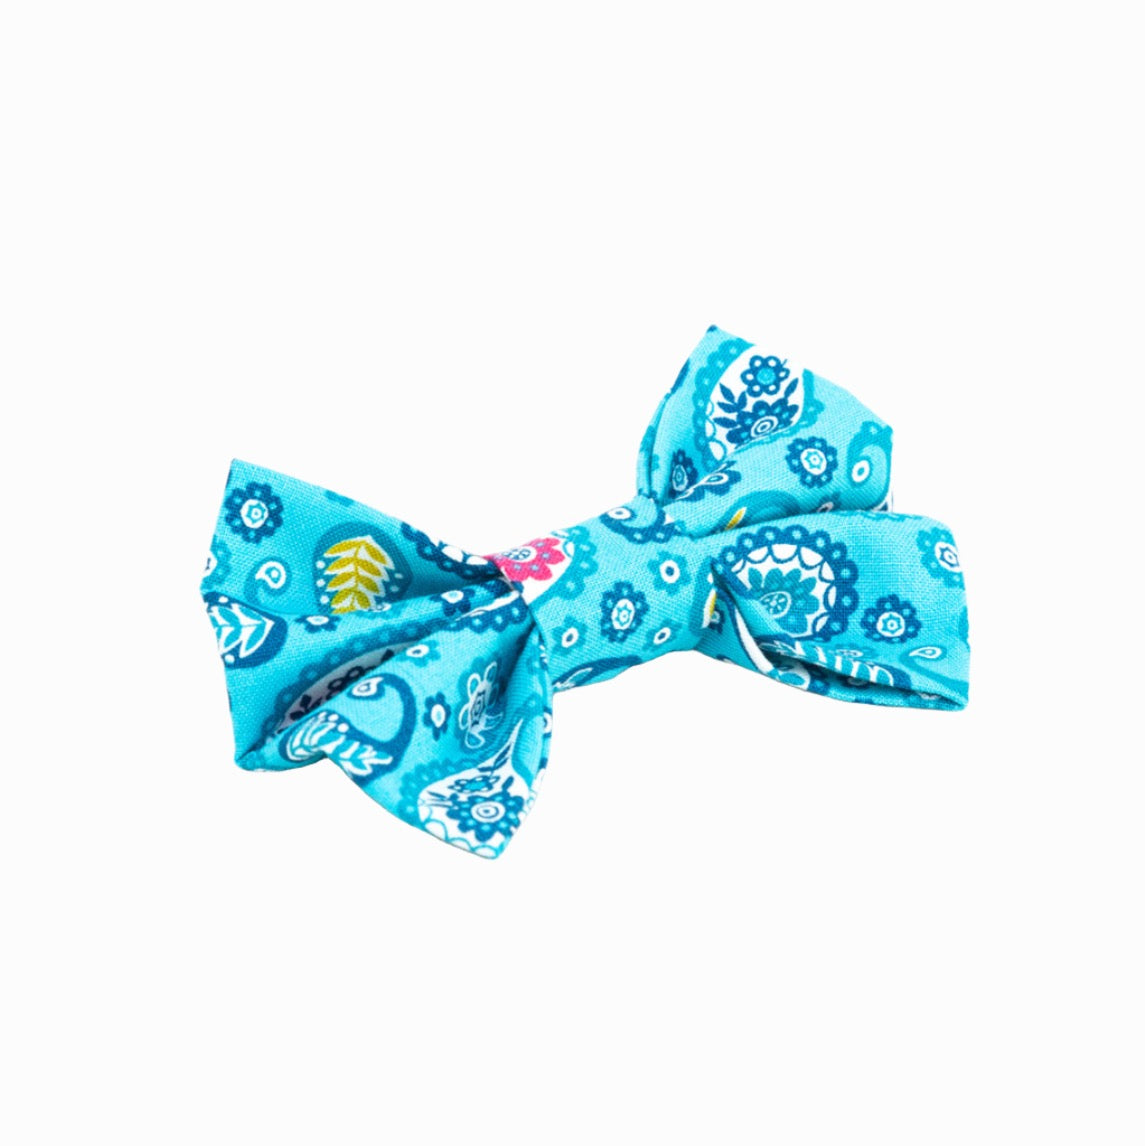 Pitter Patter Paisley Dog Bow